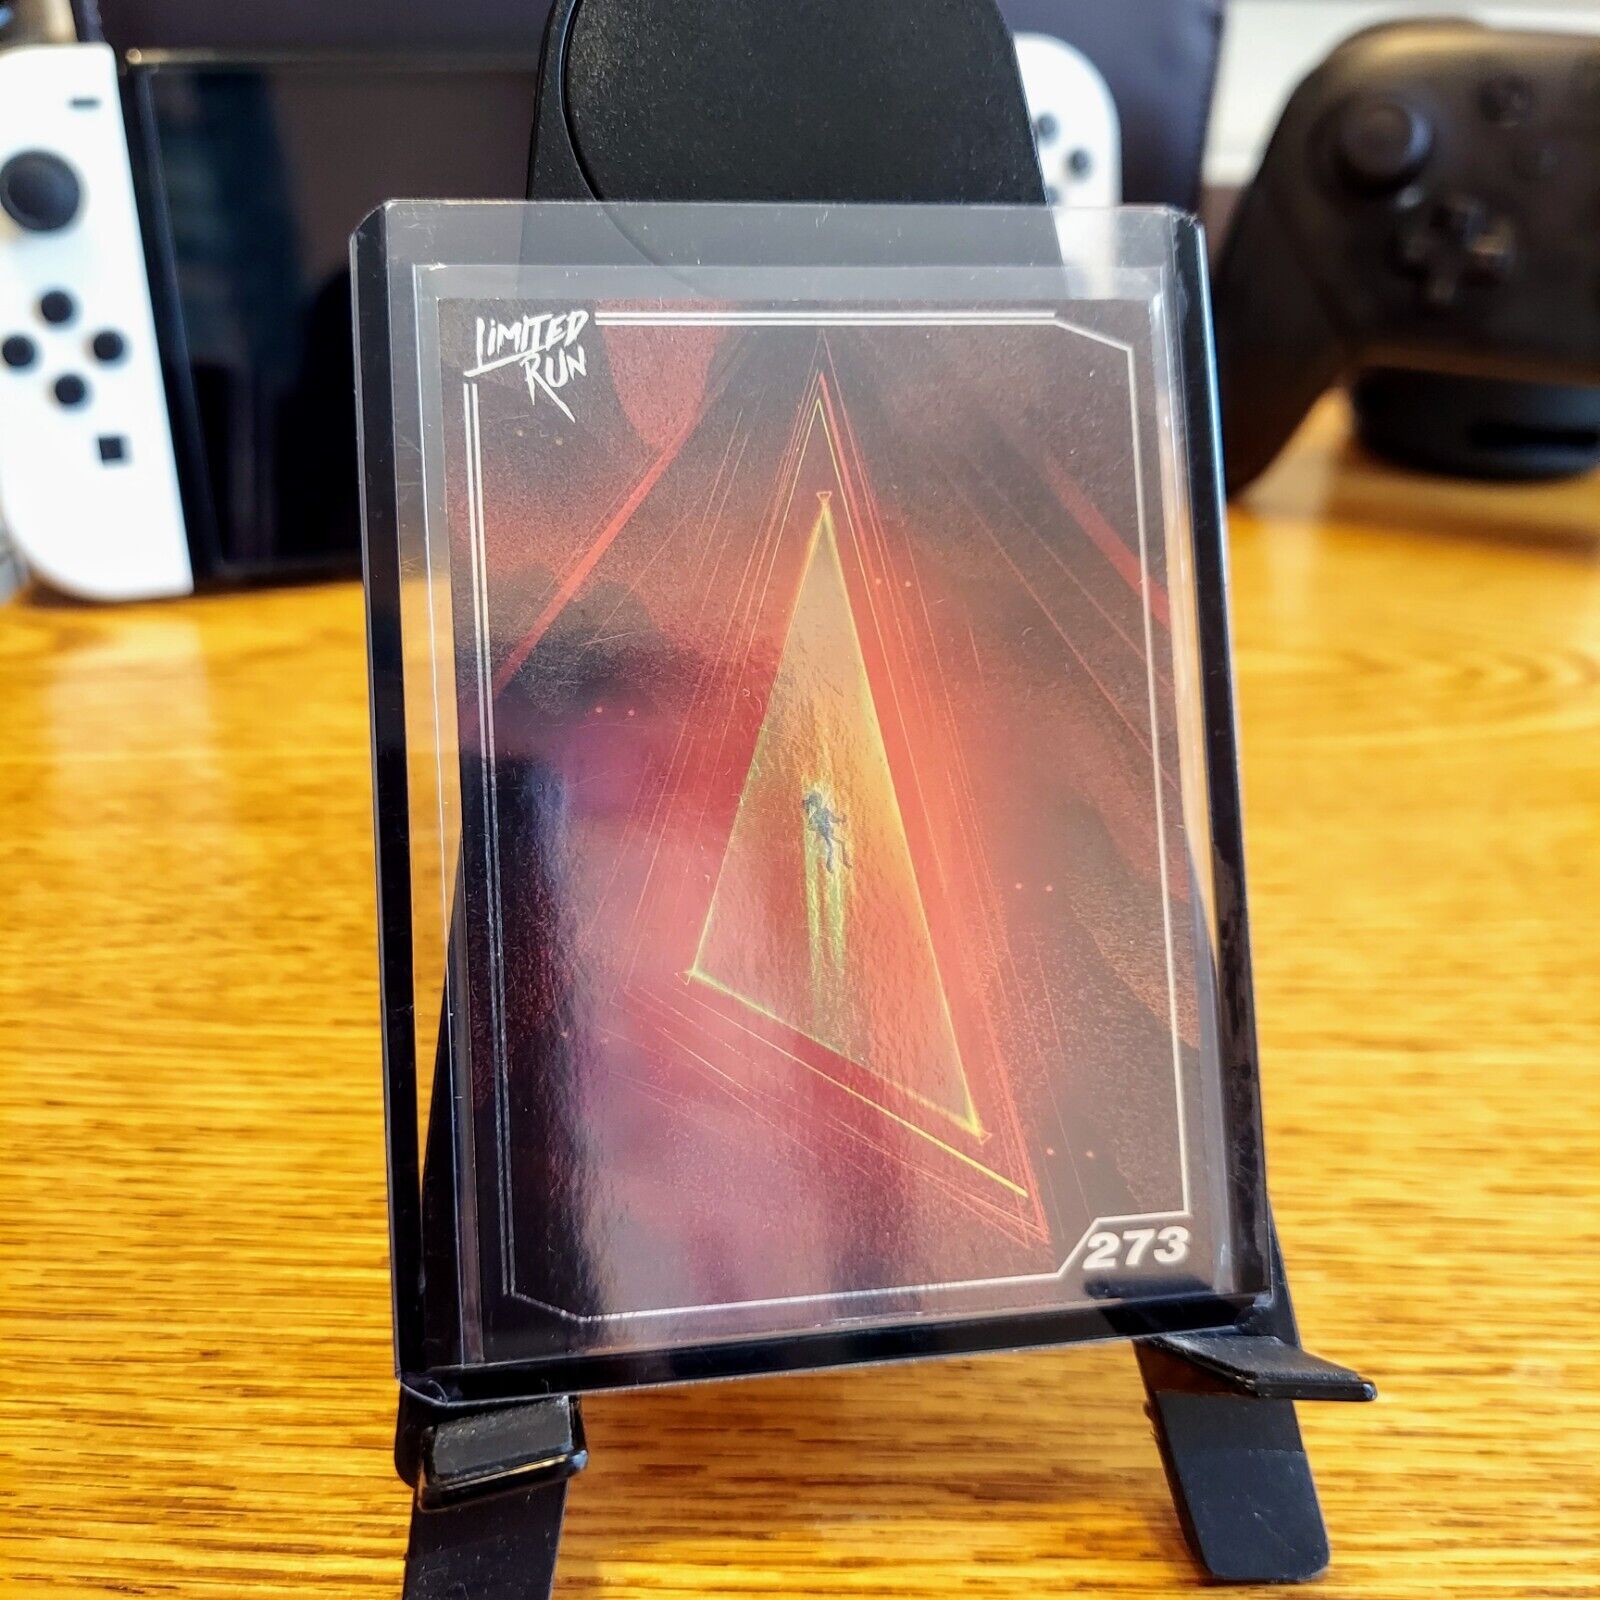 Limited Run Games silver trading card Oxenfree #273 